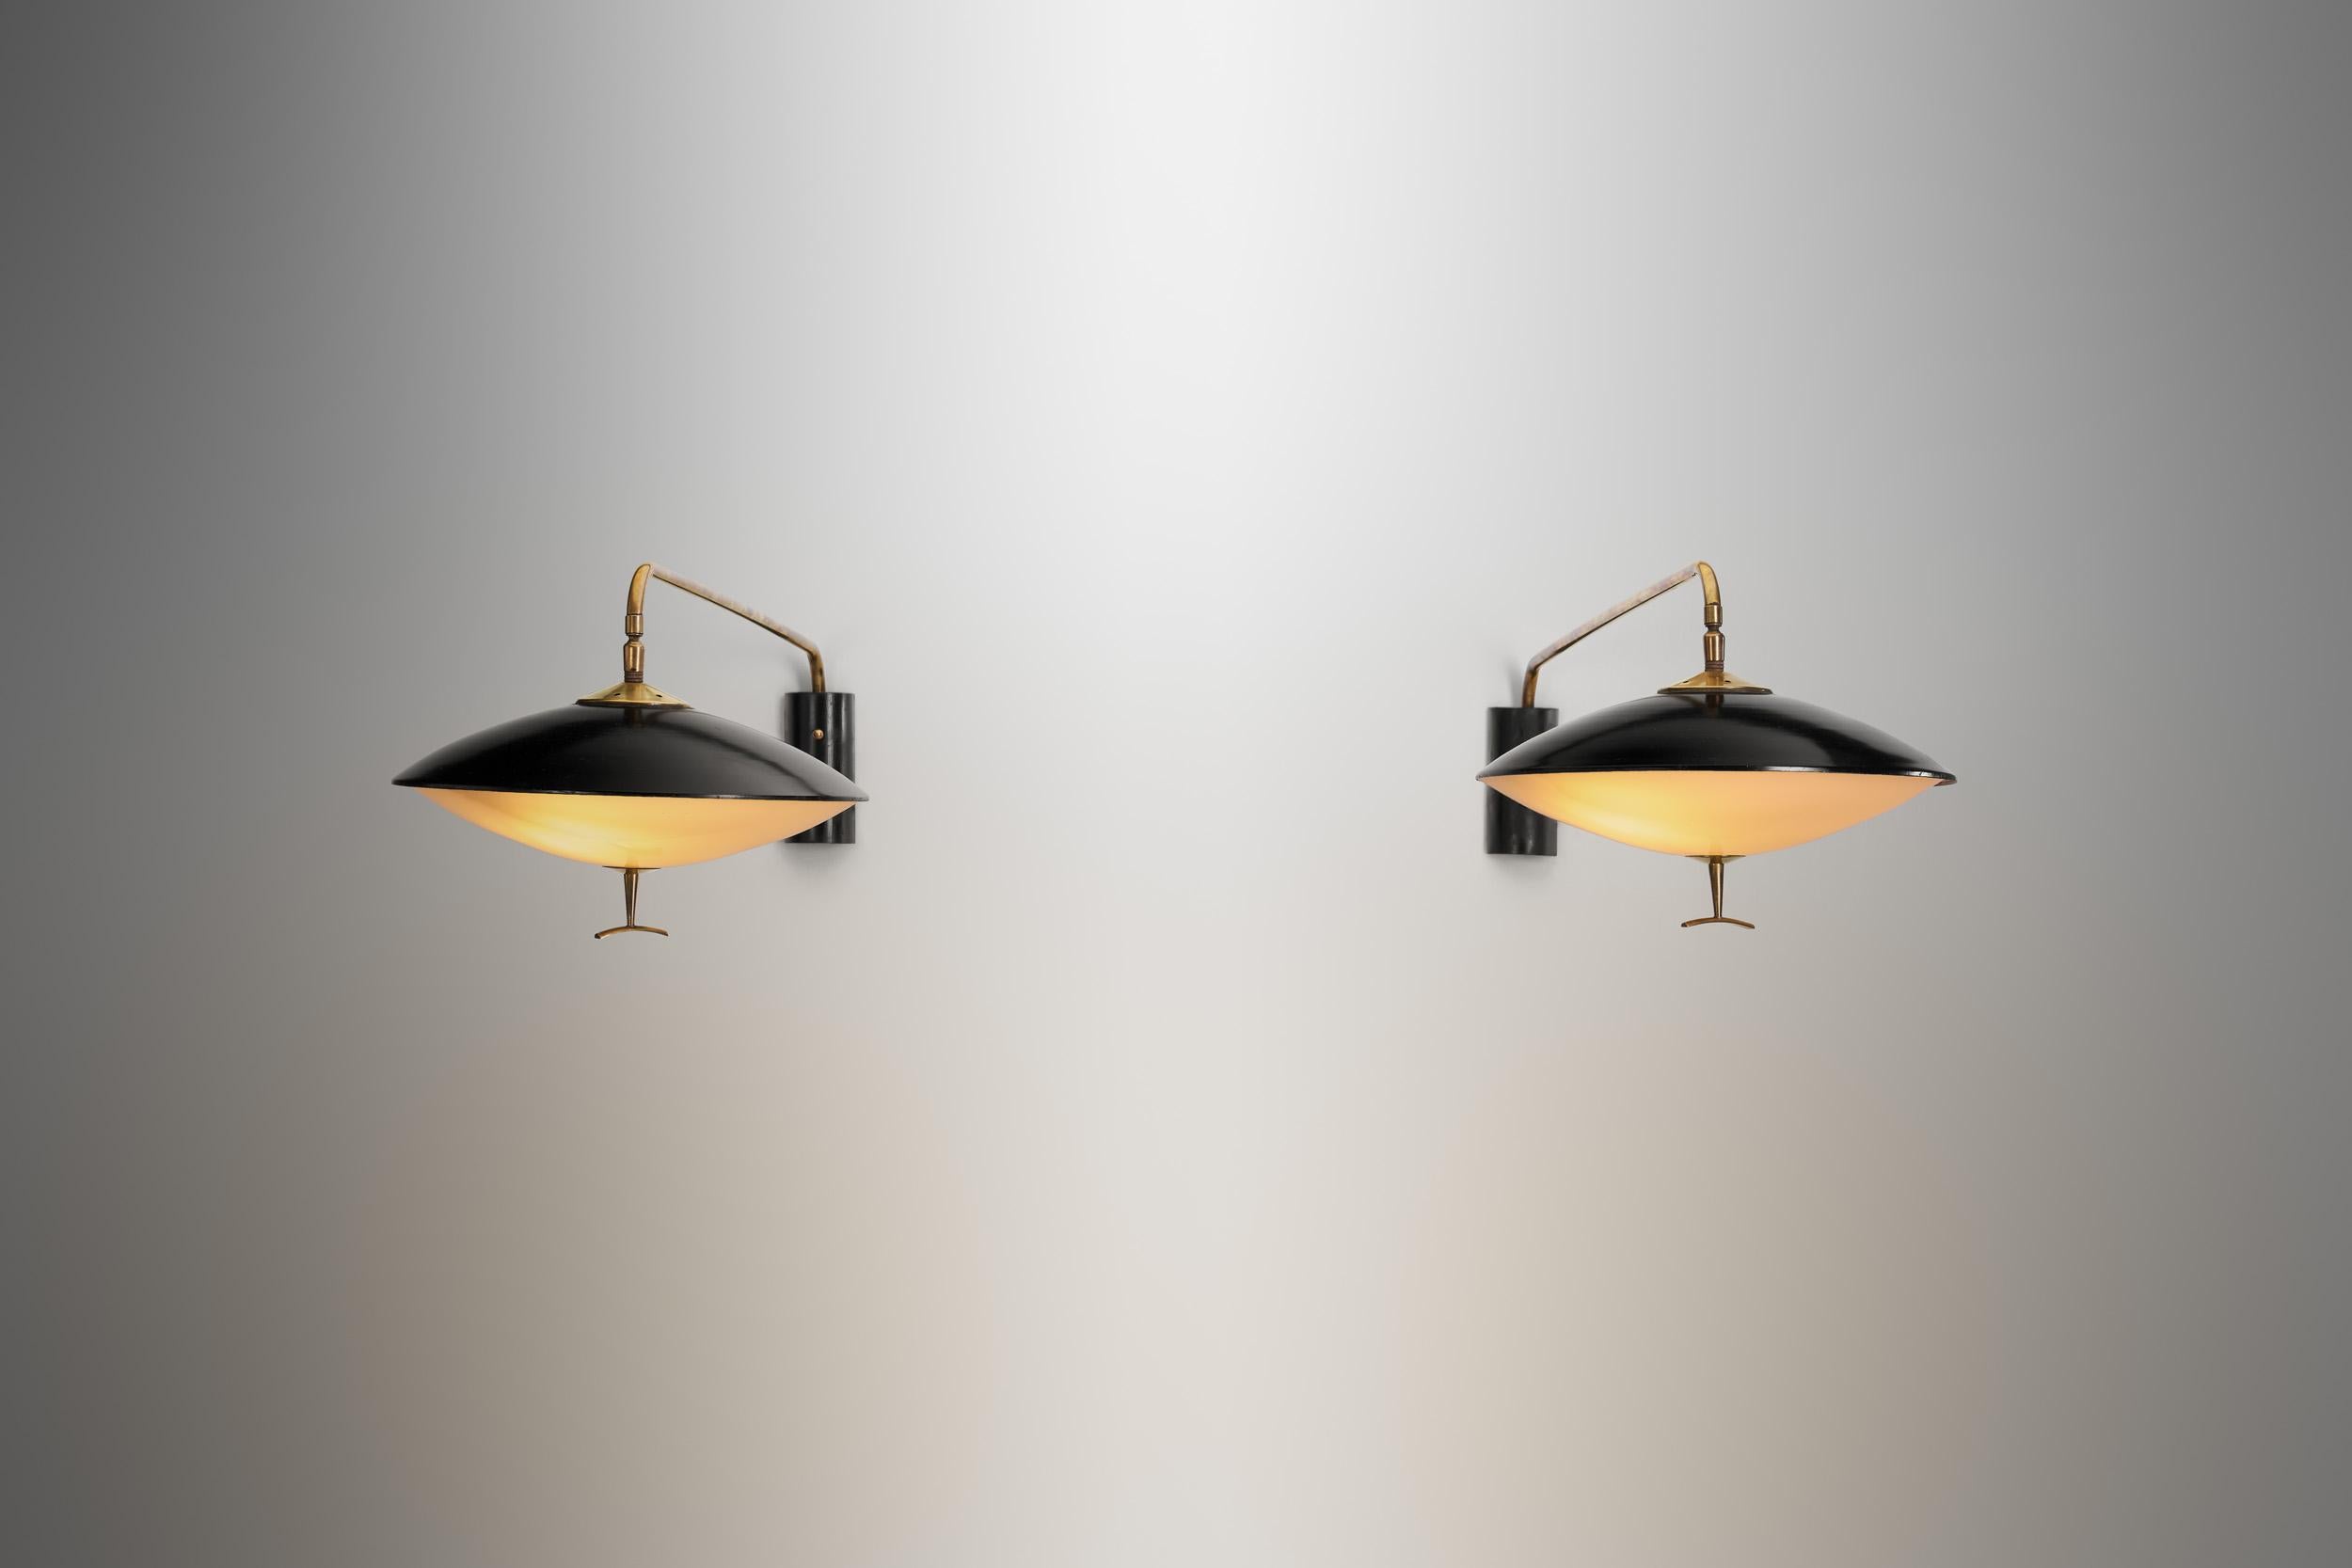 Mid-20th Century Black Lacquered Metal Saucer Wall Lights by Maison Arlus, France ca 1950s For Sale